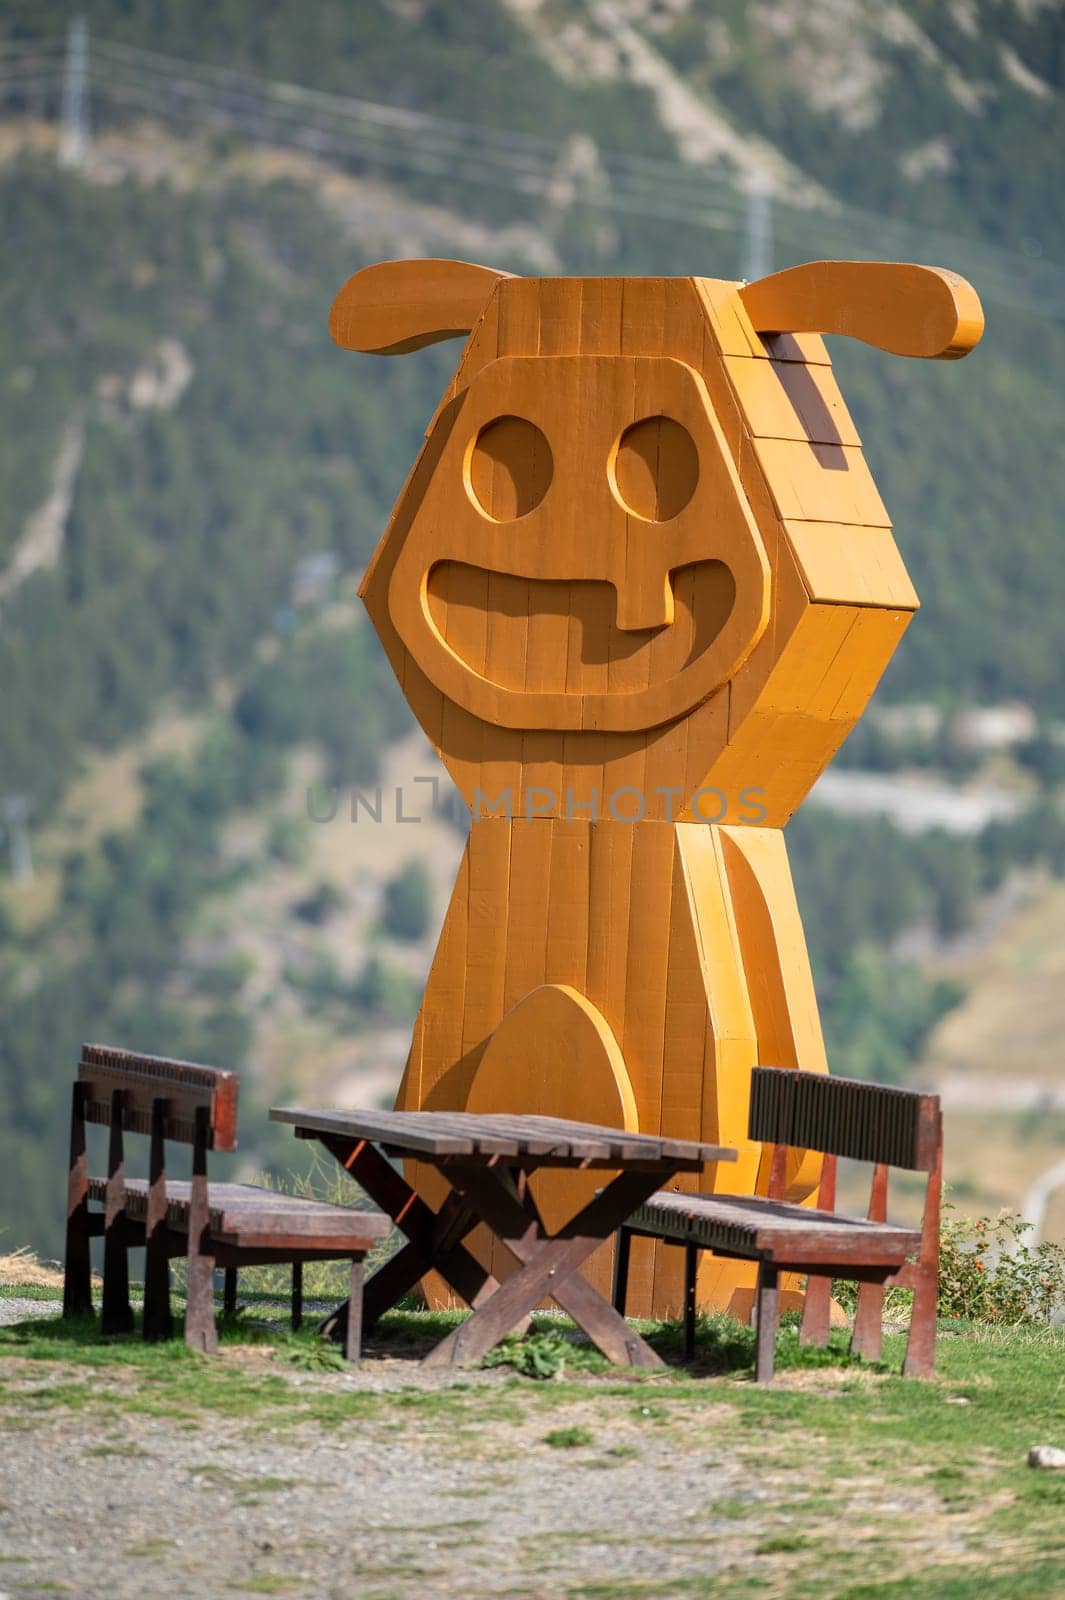 Sculptures called Tamarros in the mountains of Andorra in the Pyrenees.